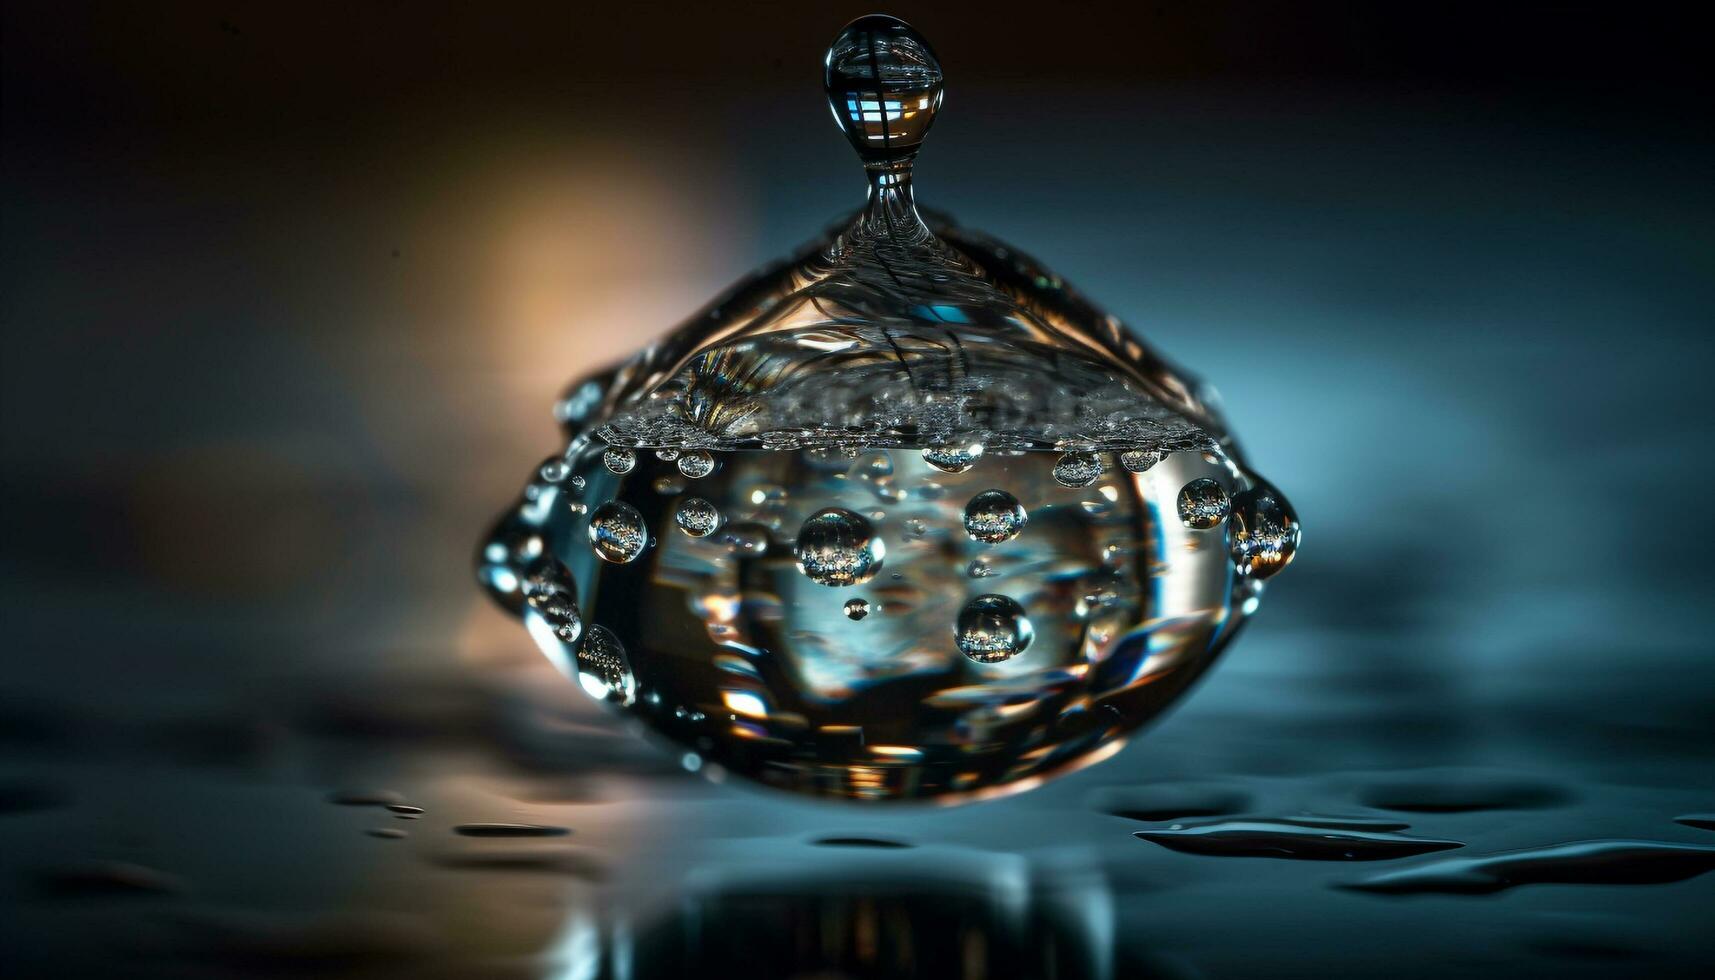 Transparent raindrop reflects pure beauty in nature design generated by AI photo